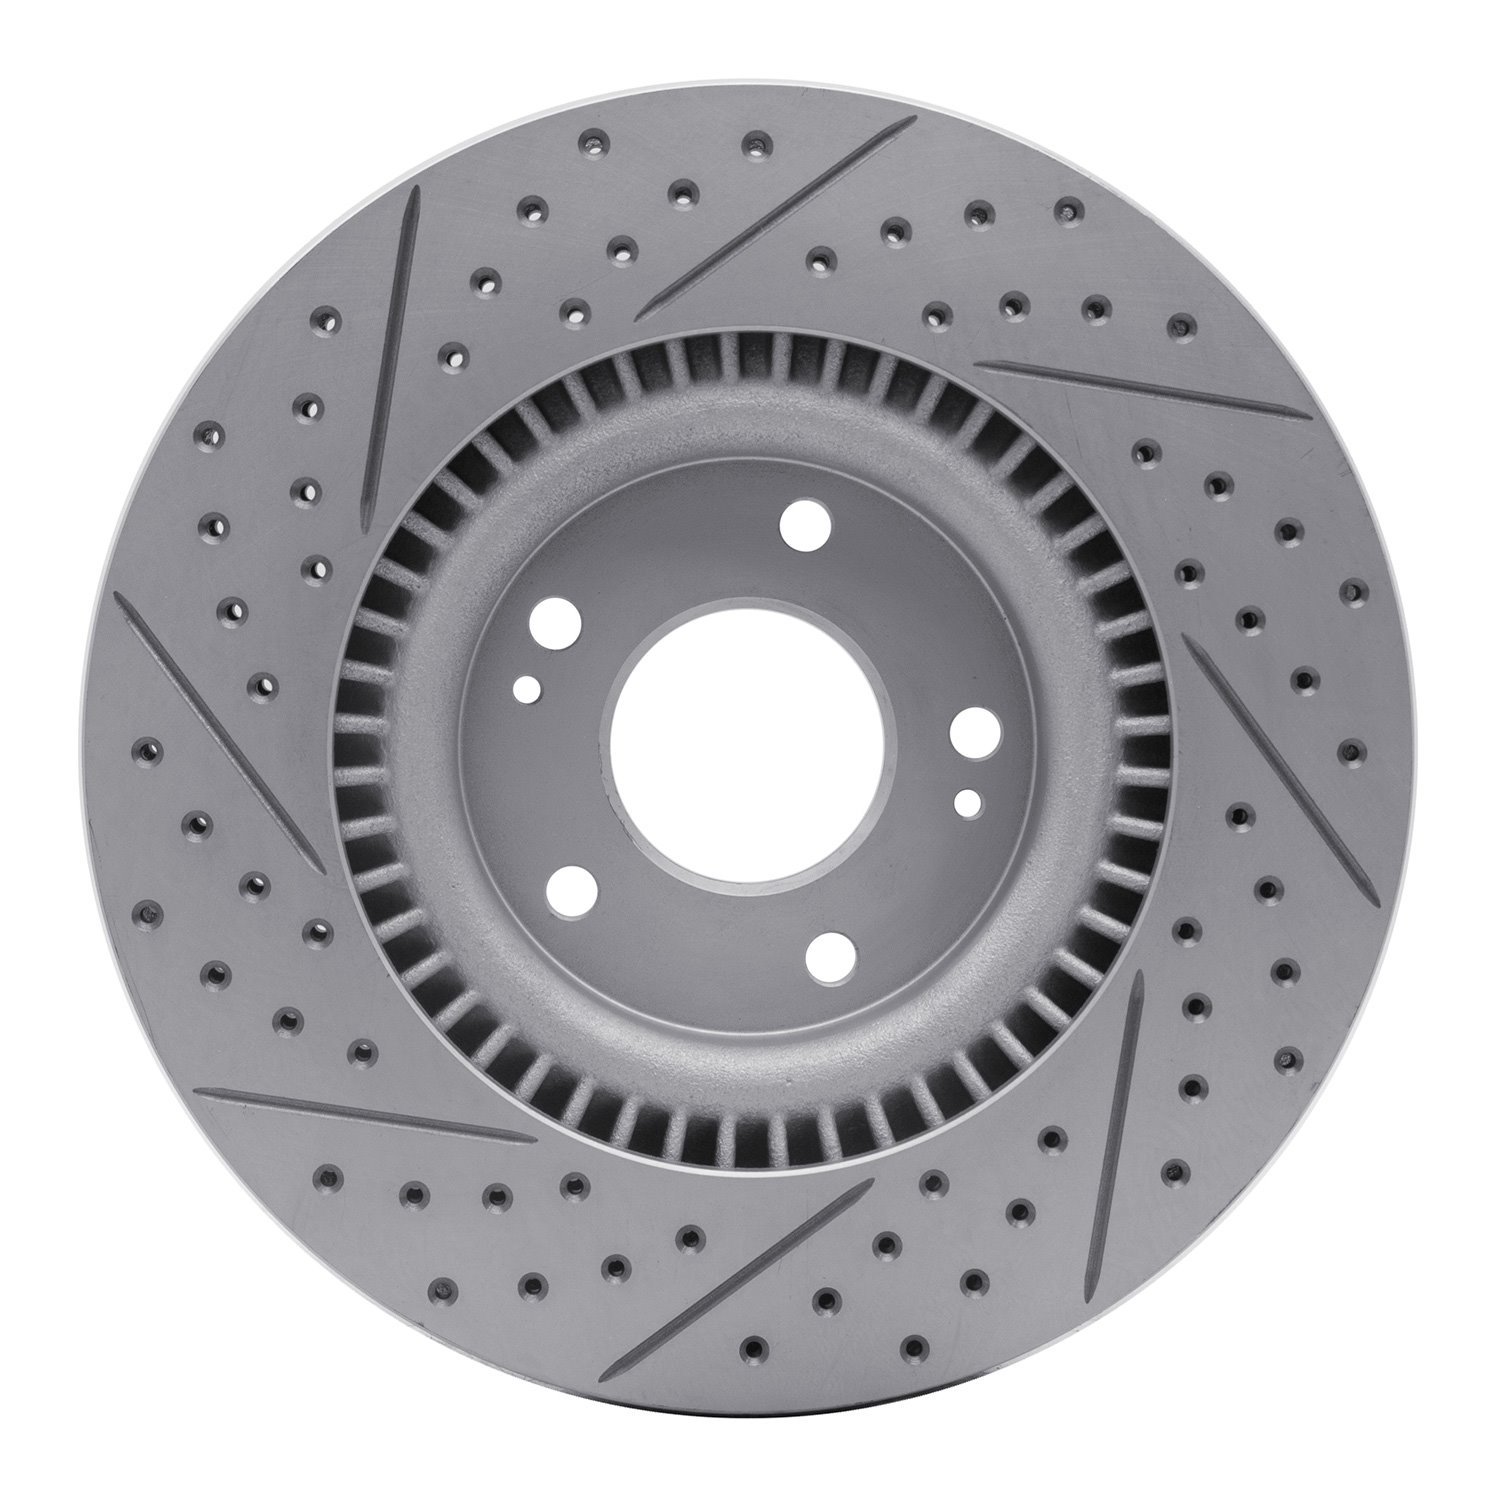 830-03003R Geoperformance Drilled/Slotted Brake Rotor, Fits Select Kia/Hyundai/Genesis, Position: Front Right